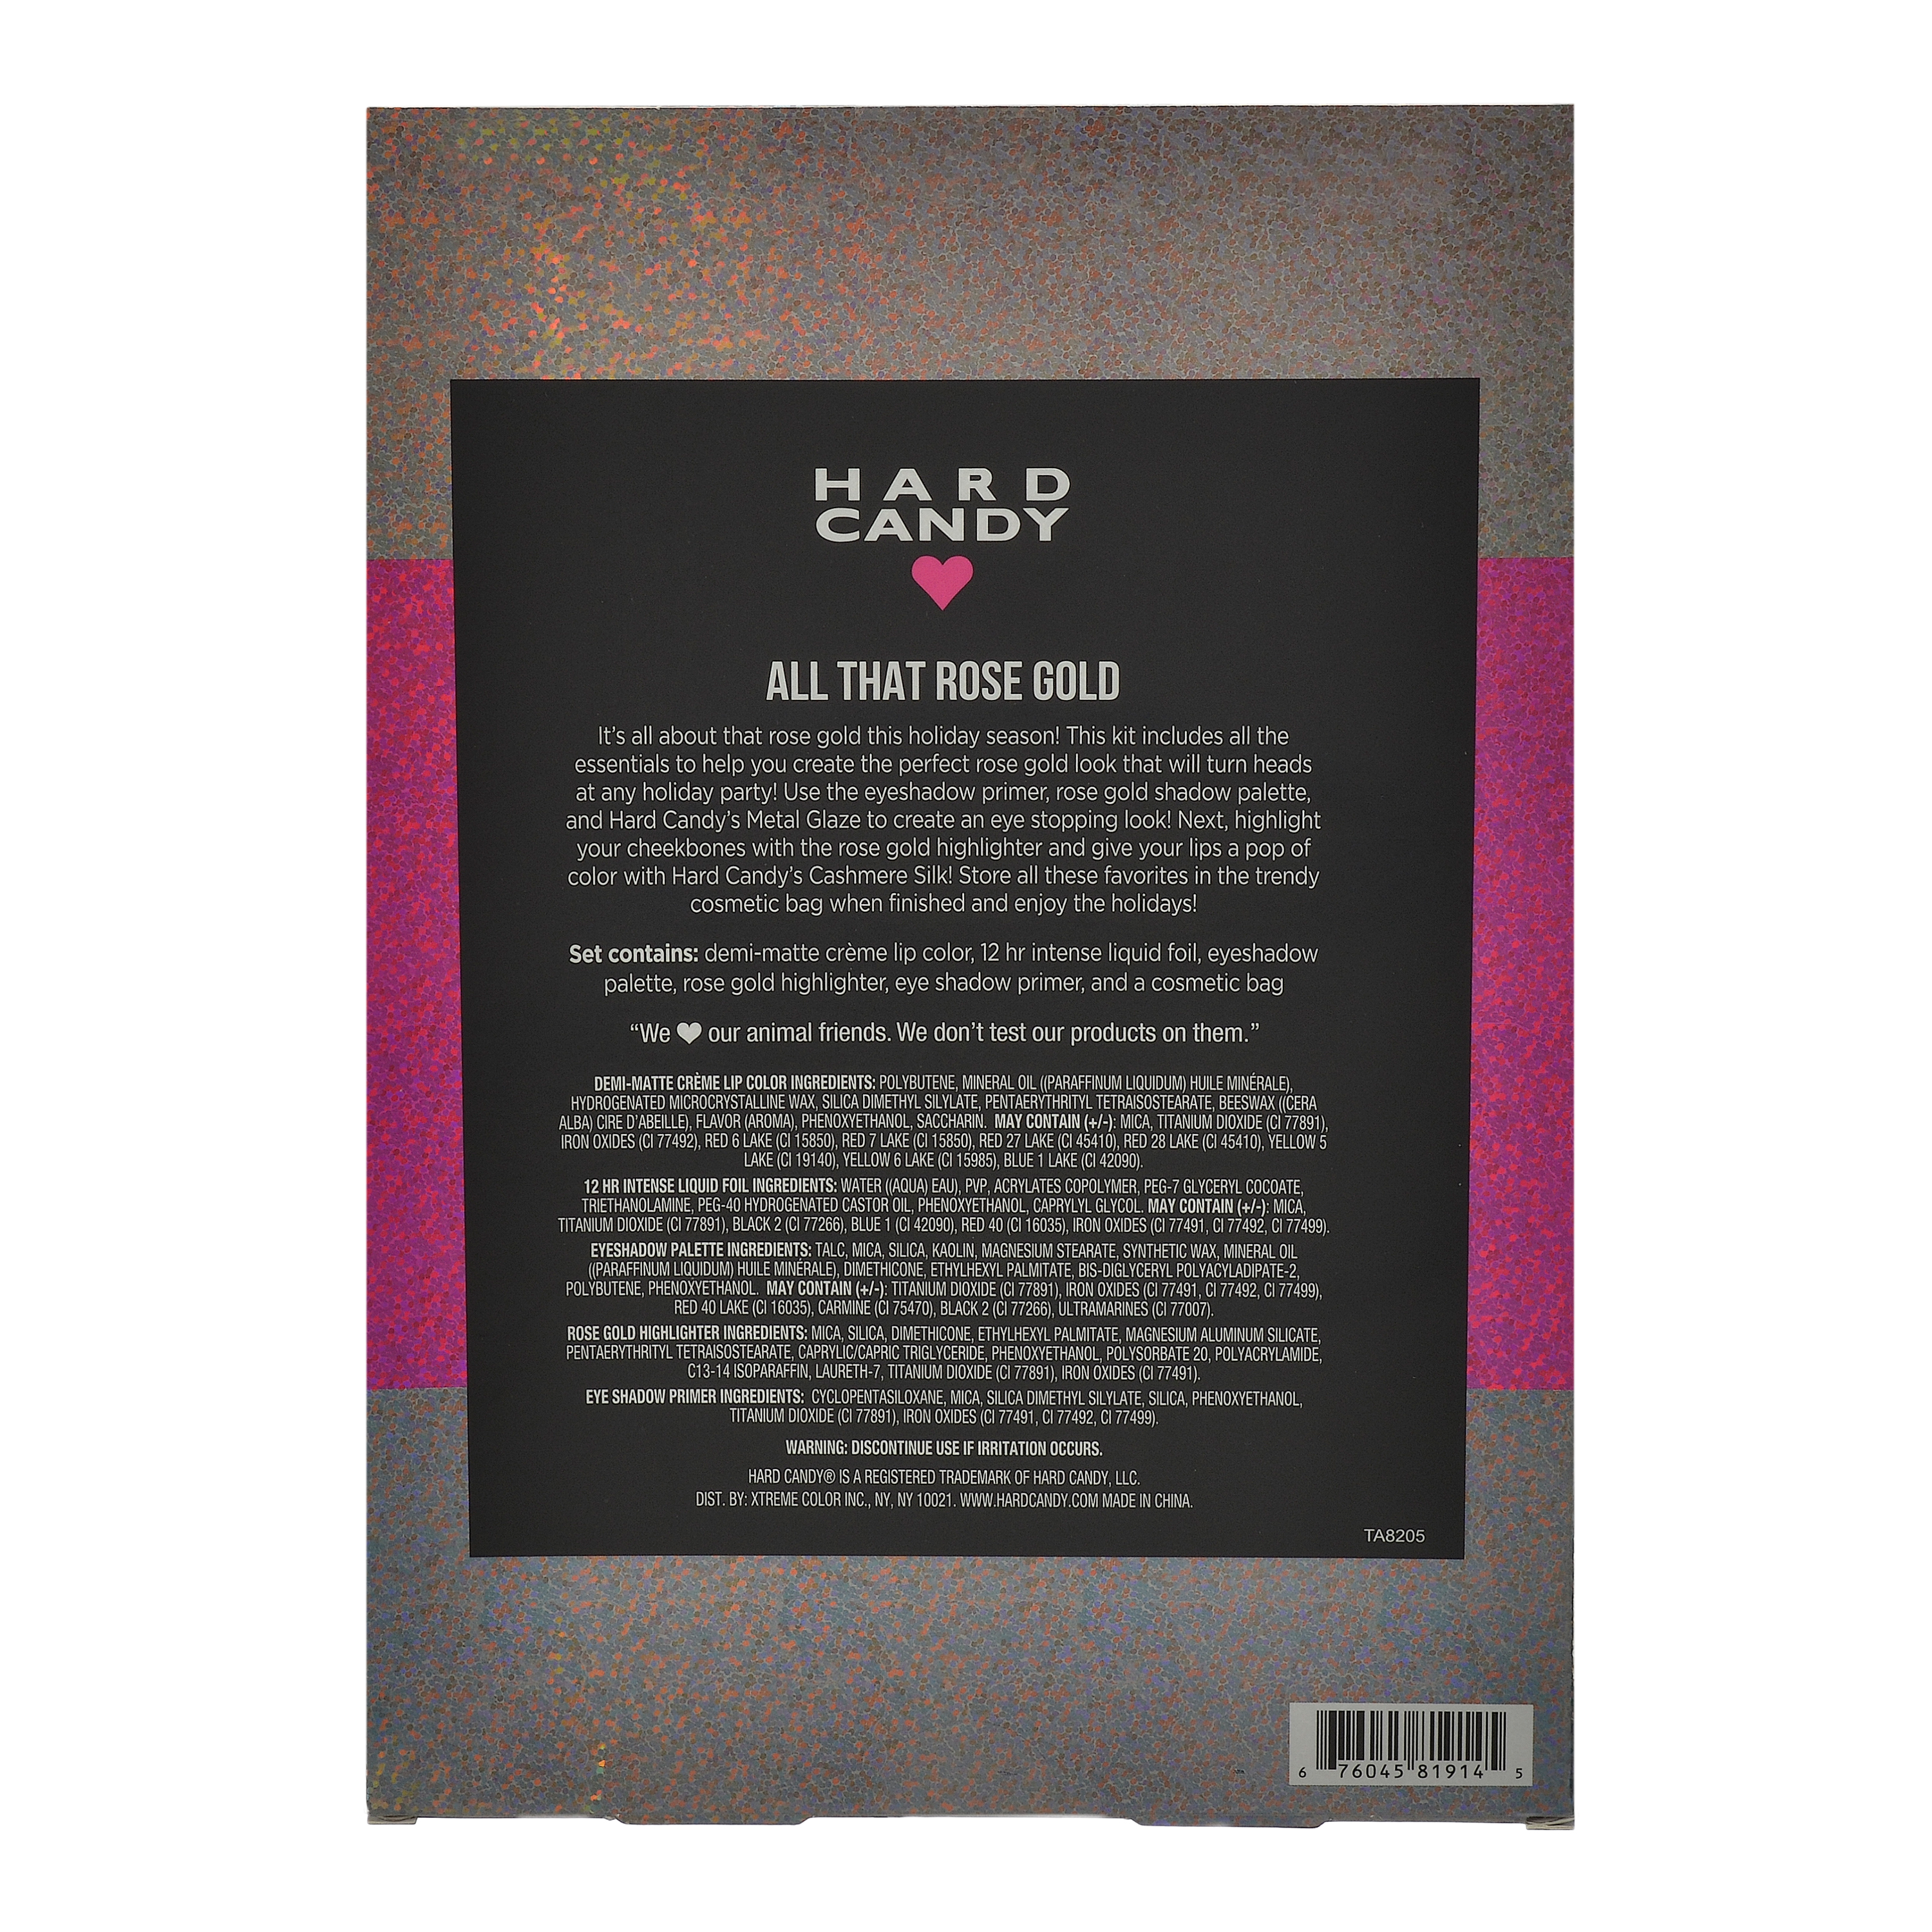 Hard Candy Holiday Makeup Gift Set, All That Rose Gold - image 2 of 3